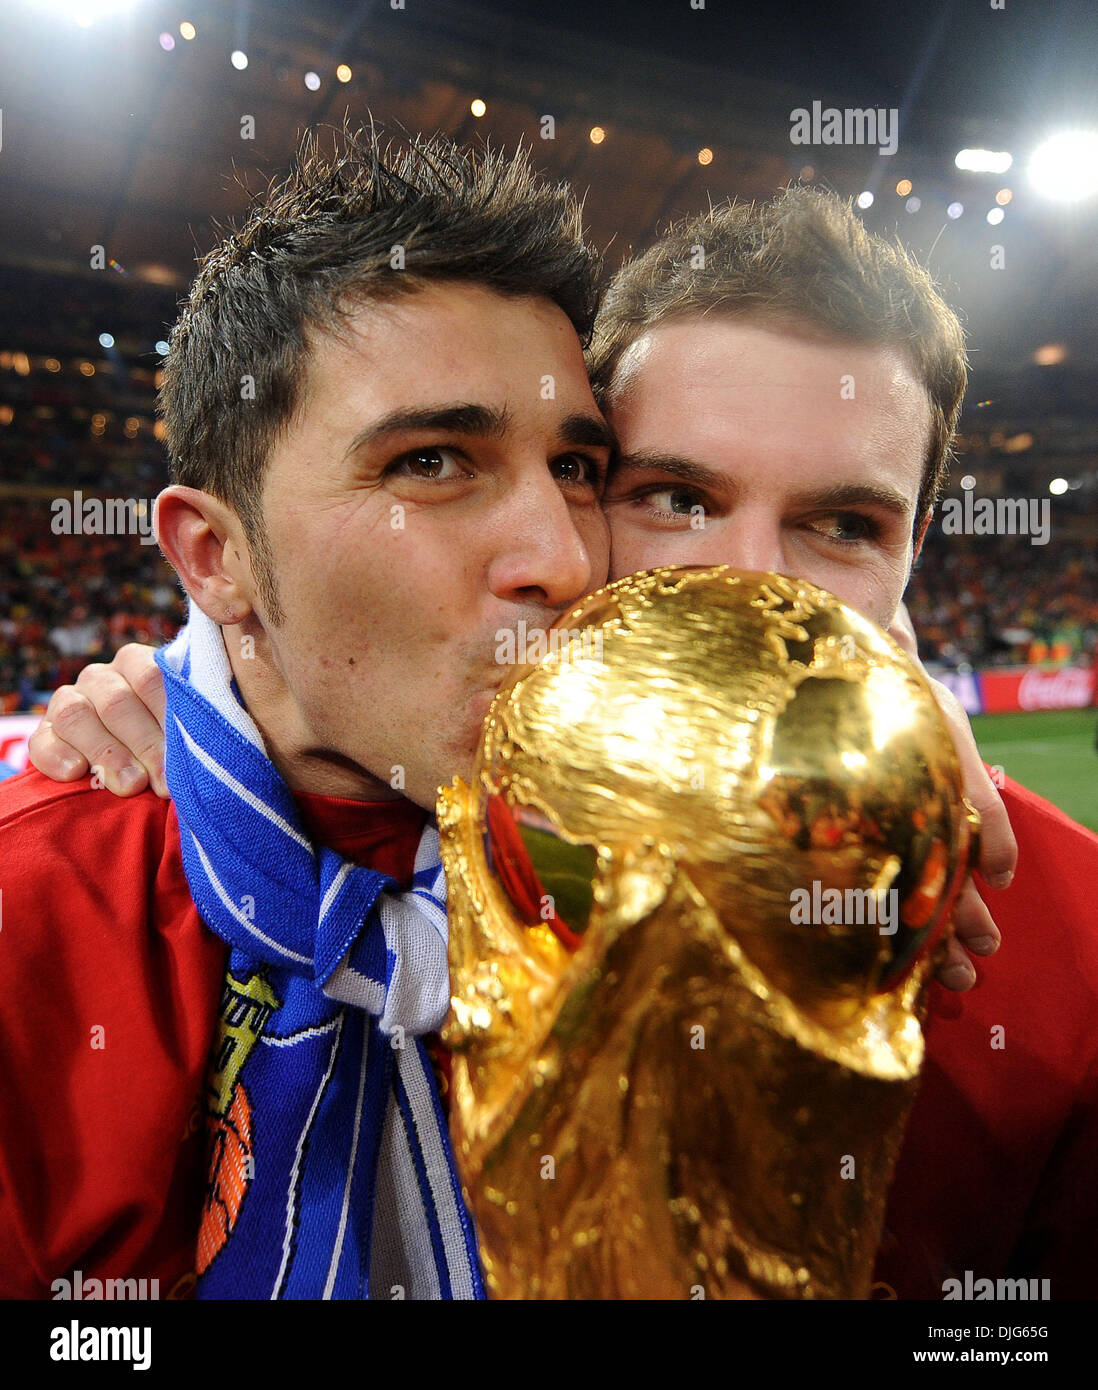 July 11, 2010 - Johannesburg, South Africa - David Villa and Juan Manuel Mata of Spain celebrate with the World Cup trophy after the 2010 FIFA World Cup Final soccer match between Netherlands and Spain at Soccer City Stadium on July 11, 2010 in Johannesburg, South Africa. (Credit Image: © Luca Ghidoni/ZUMApress.com) Stock Photo